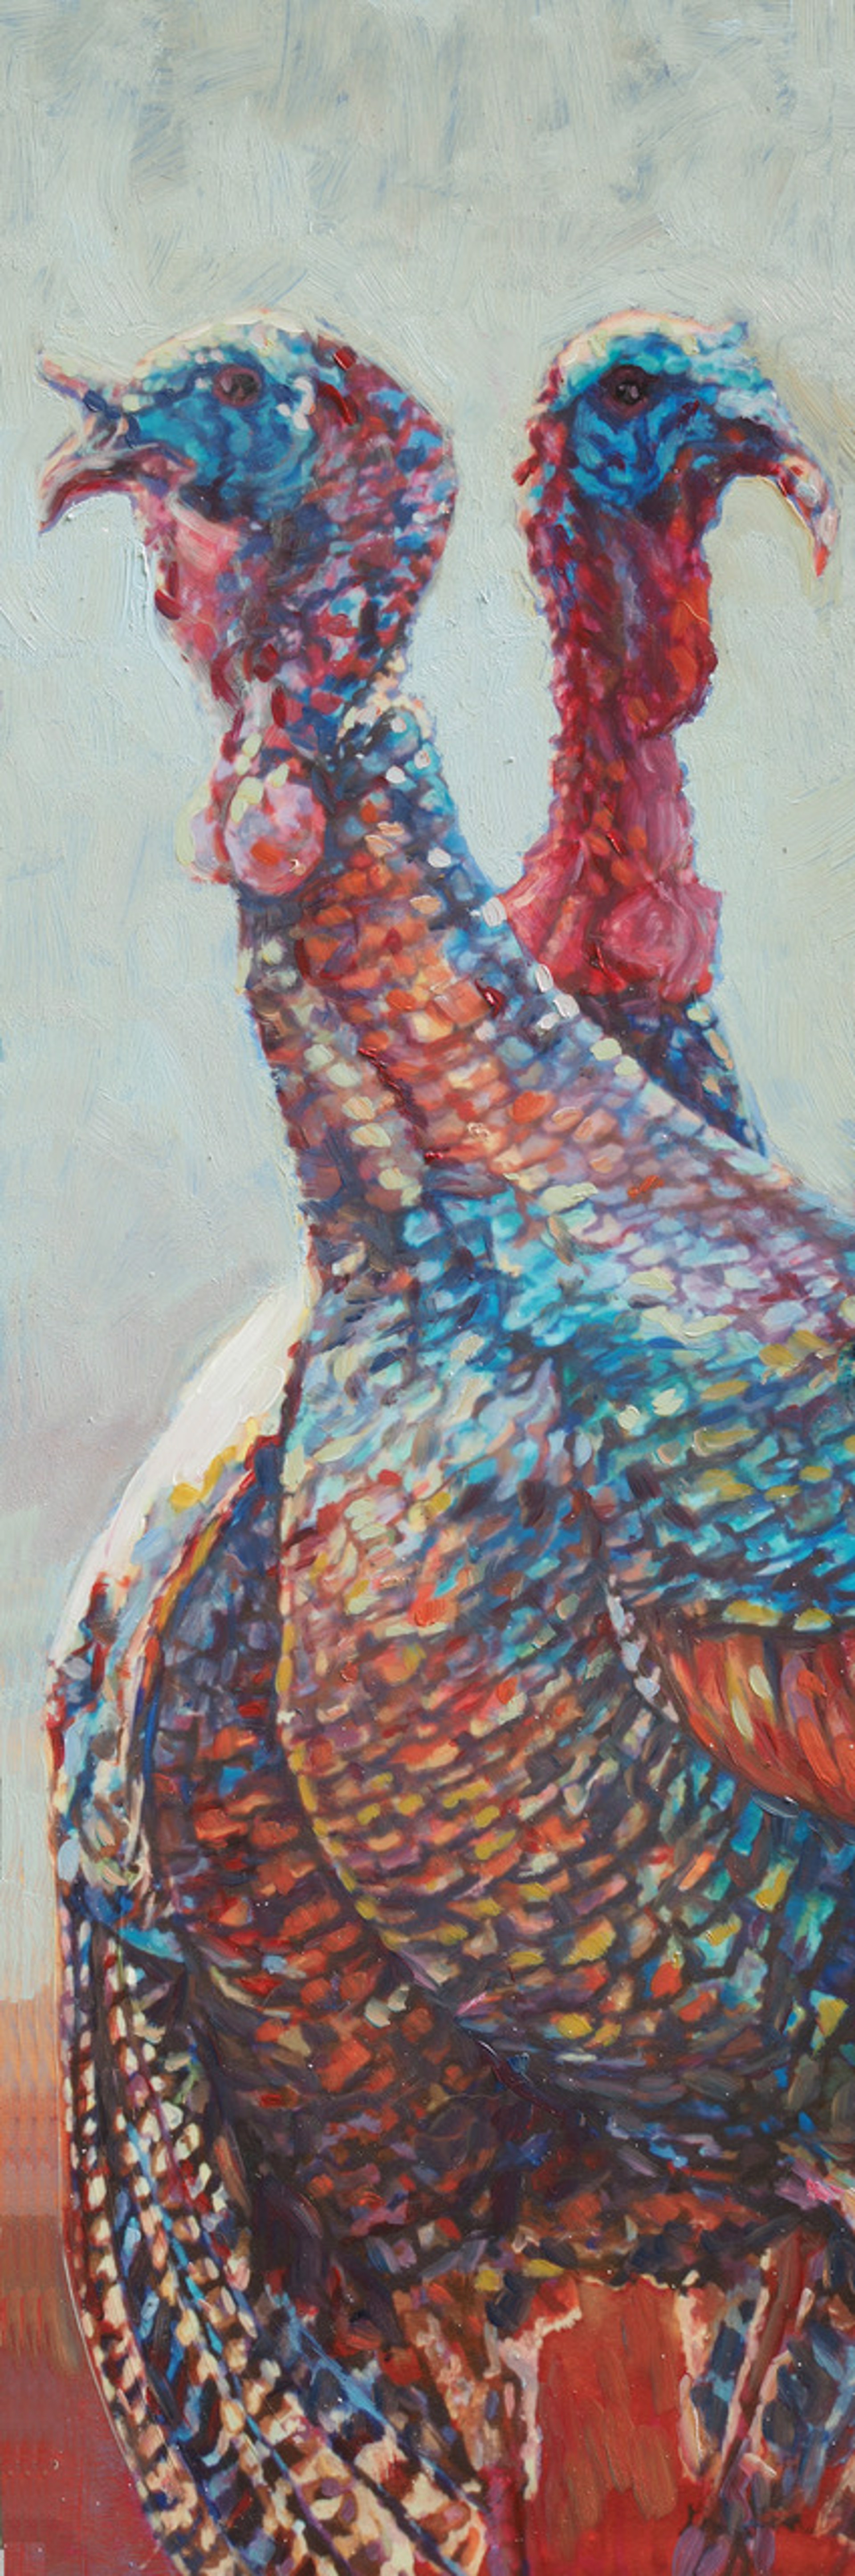 Patricia Griffin Two Colorful Turkeys In Oil On Linen, A Contemporary Fine Art Painting and Modern Wildlife Art Piece Available At Gallery Wild